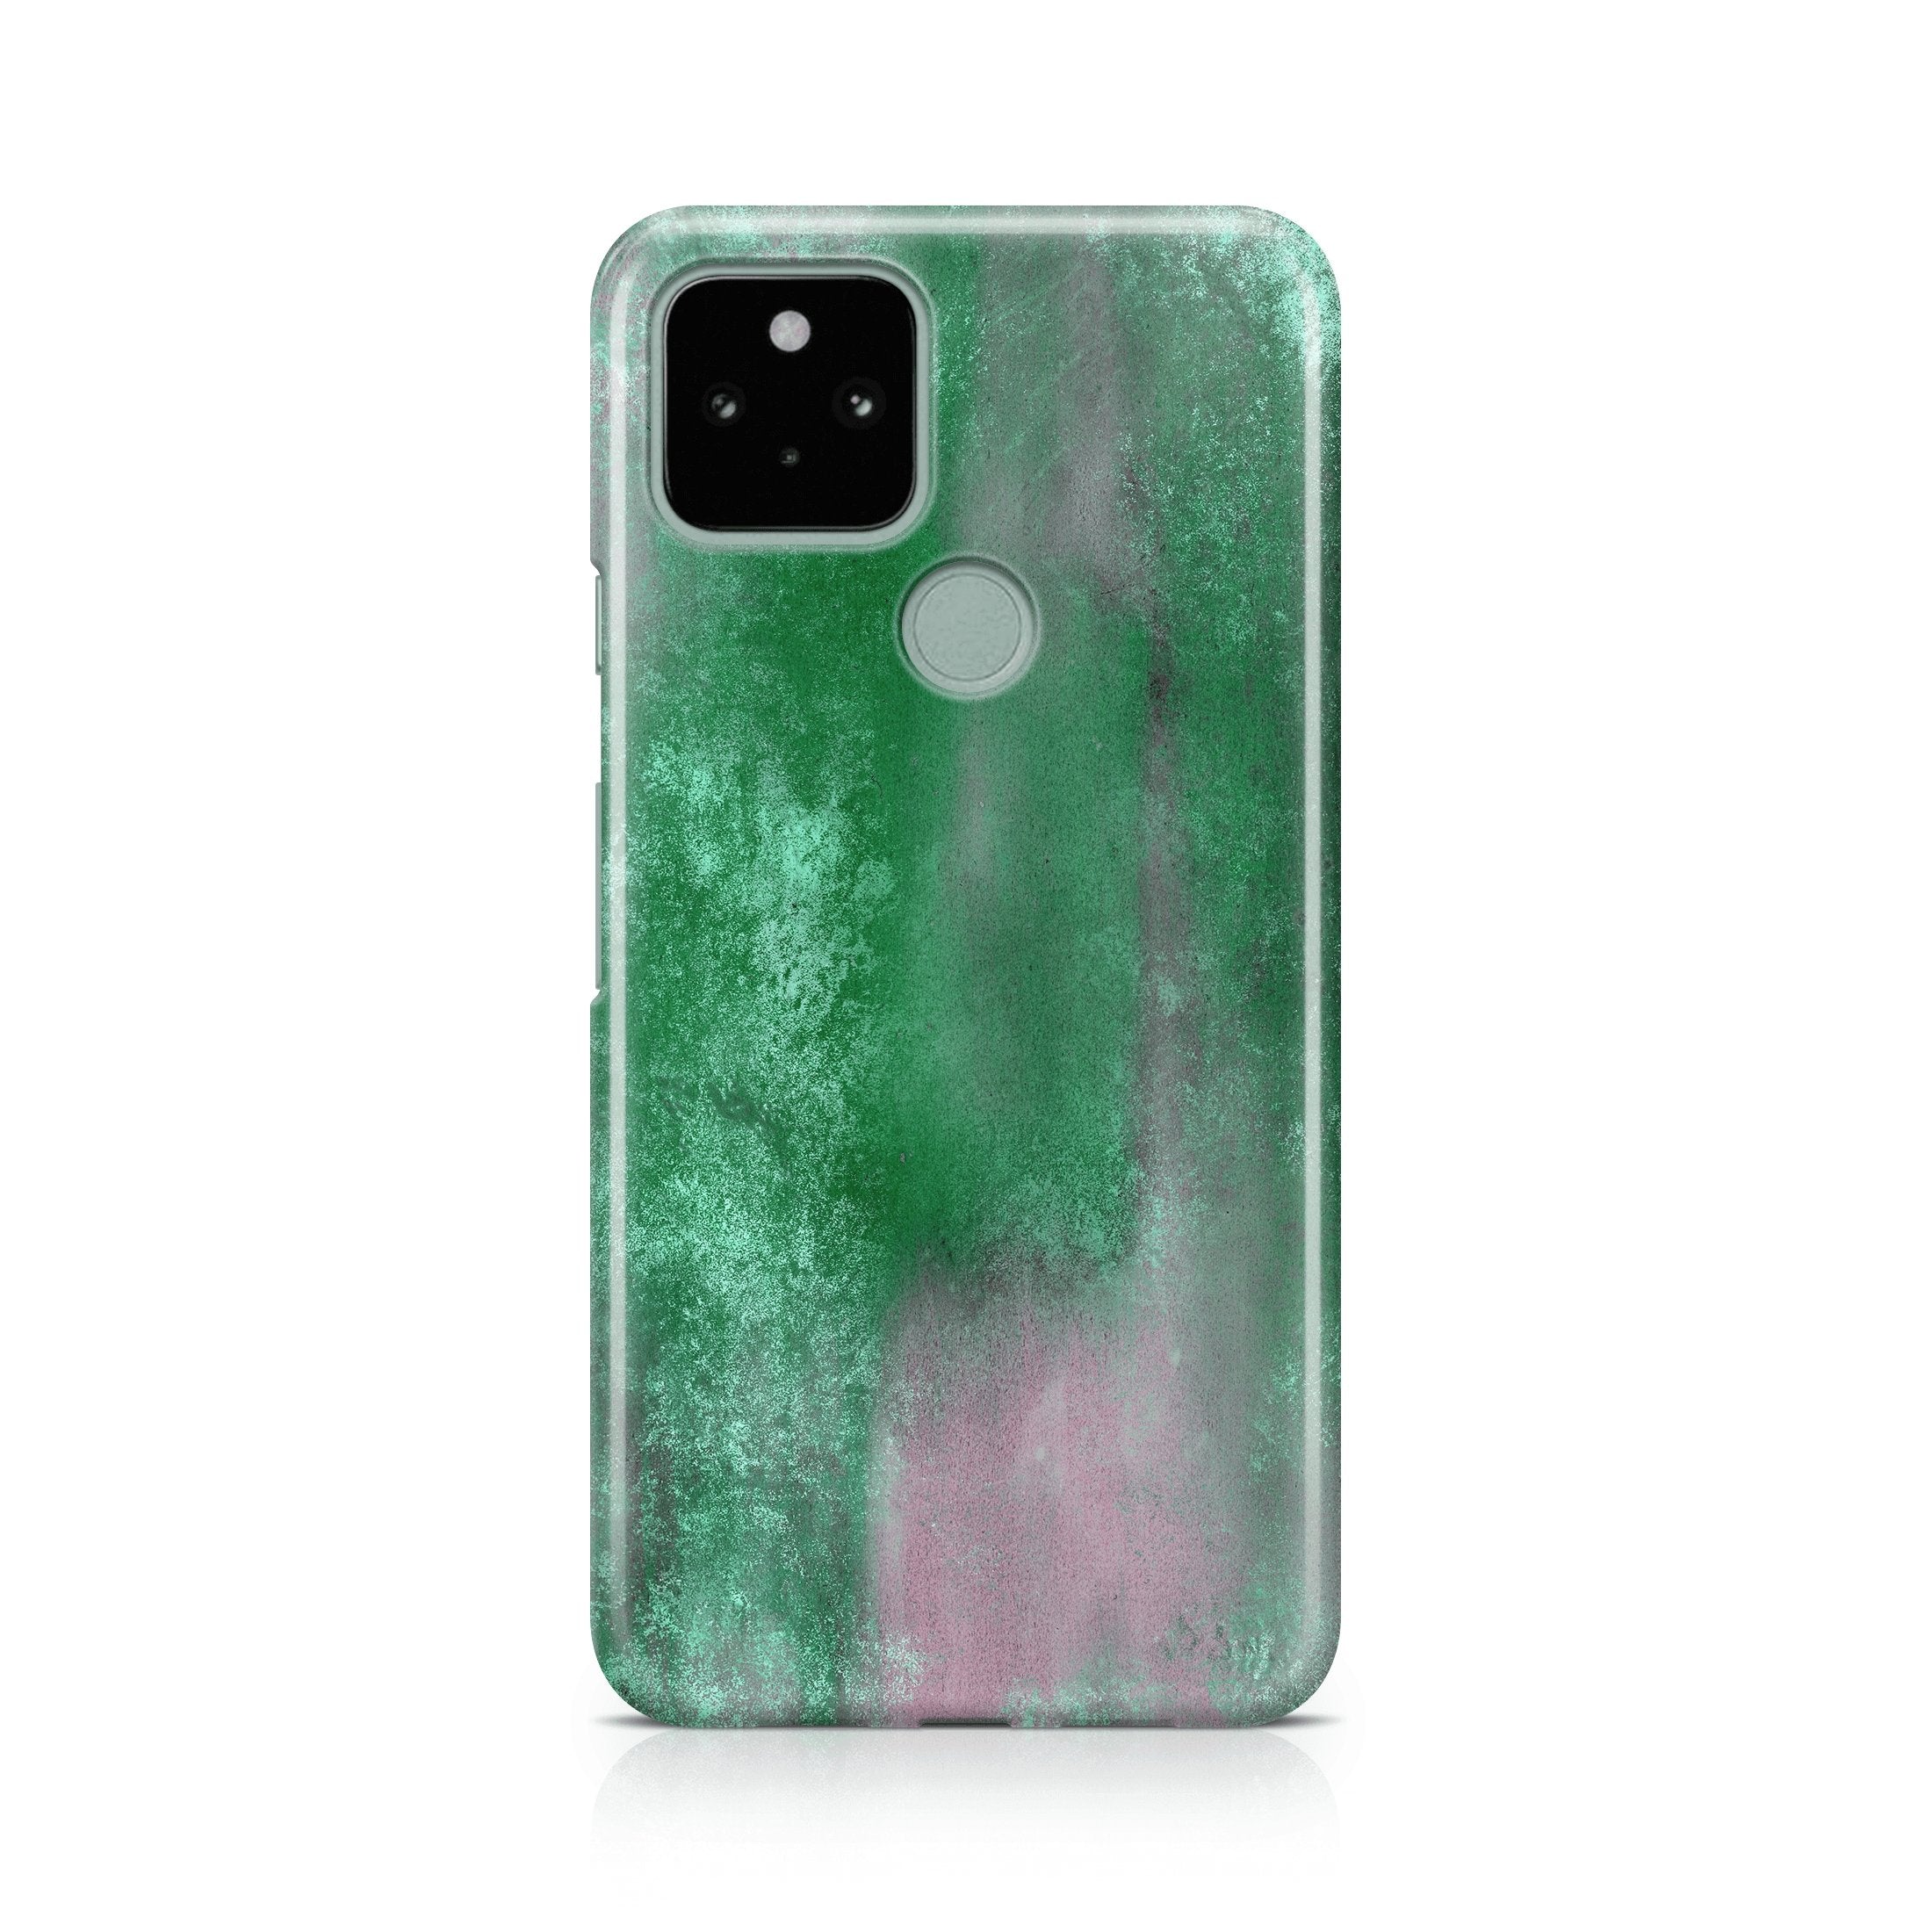 Rustic Emerald I - Google phone case designs by CaseSwagger